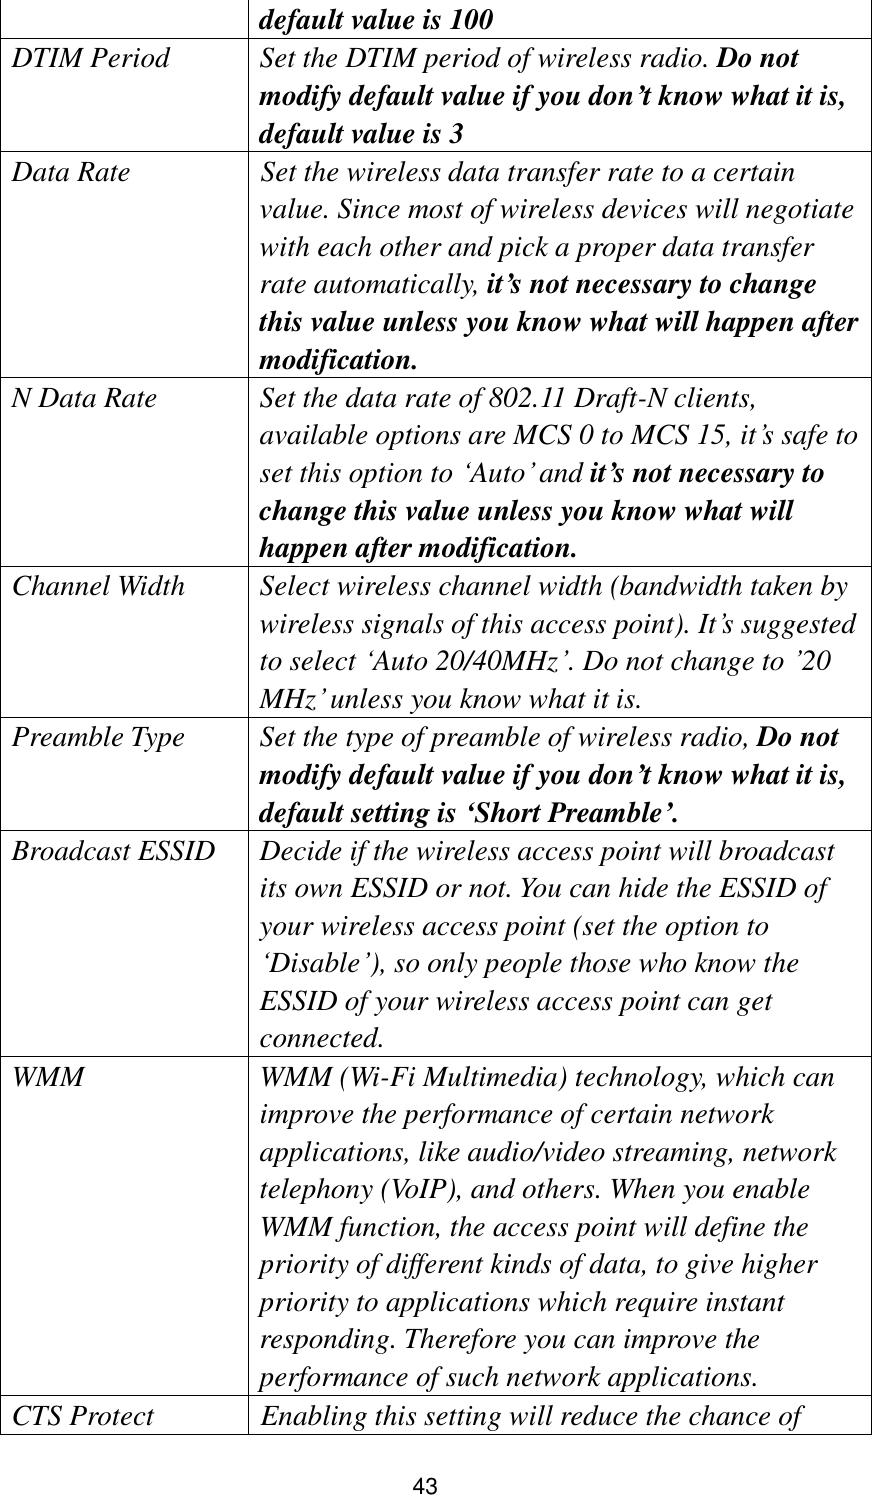 43 default value is 100   DTIM Period Set the DTIM period of wireless radio. Do not modify default value if you don’t know what it is, default value is 3 Data Rate  Set the wireless data transfer rate to a certain value. Since most of wireless devices will negotiate with each other and pick a proper data transfer rate automatically, it’s not necessary to change this value unless you know what will happen after modification. N Data Rate Set the data rate of 802.11 Draft-N clients, available options are MCS 0 to MCS 15, it‟s safe to set this option to „Auto‟ and it’s not necessary to change this value unless you know what will happen after modification. Channel Width Select wireless channel width (bandwidth taken by wireless signals of this access point). It‟s suggested to select „Auto 20/40MHz‟. Do not change to ‟20 MHz‟ unless you know what it is. Preamble Type Set the type of preamble of wireless radio, Do not modify default value if you don’t know what it is, default setting is ‘Short Preamble’. Broadcast ESSID Decide if the wireless access point will broadcast its own ESSID or not. You can hide the ESSID of your wireless access point (set the option to „Disable‟), so only people those who know the ESSID of your wireless access point can get connected. WMM WMM (Wi-Fi Multimedia) technology, which can improve the performance of certain network applications, like audio/video streaming, network telephony (VoIP), and others. When you enable WMM function, the access point will define the priority of different kinds of data, to give higher priority to applications which require instant responding. Therefore you can improve the performance of such network applications. CTS Protect  Enabling this setting will reduce the chance of 